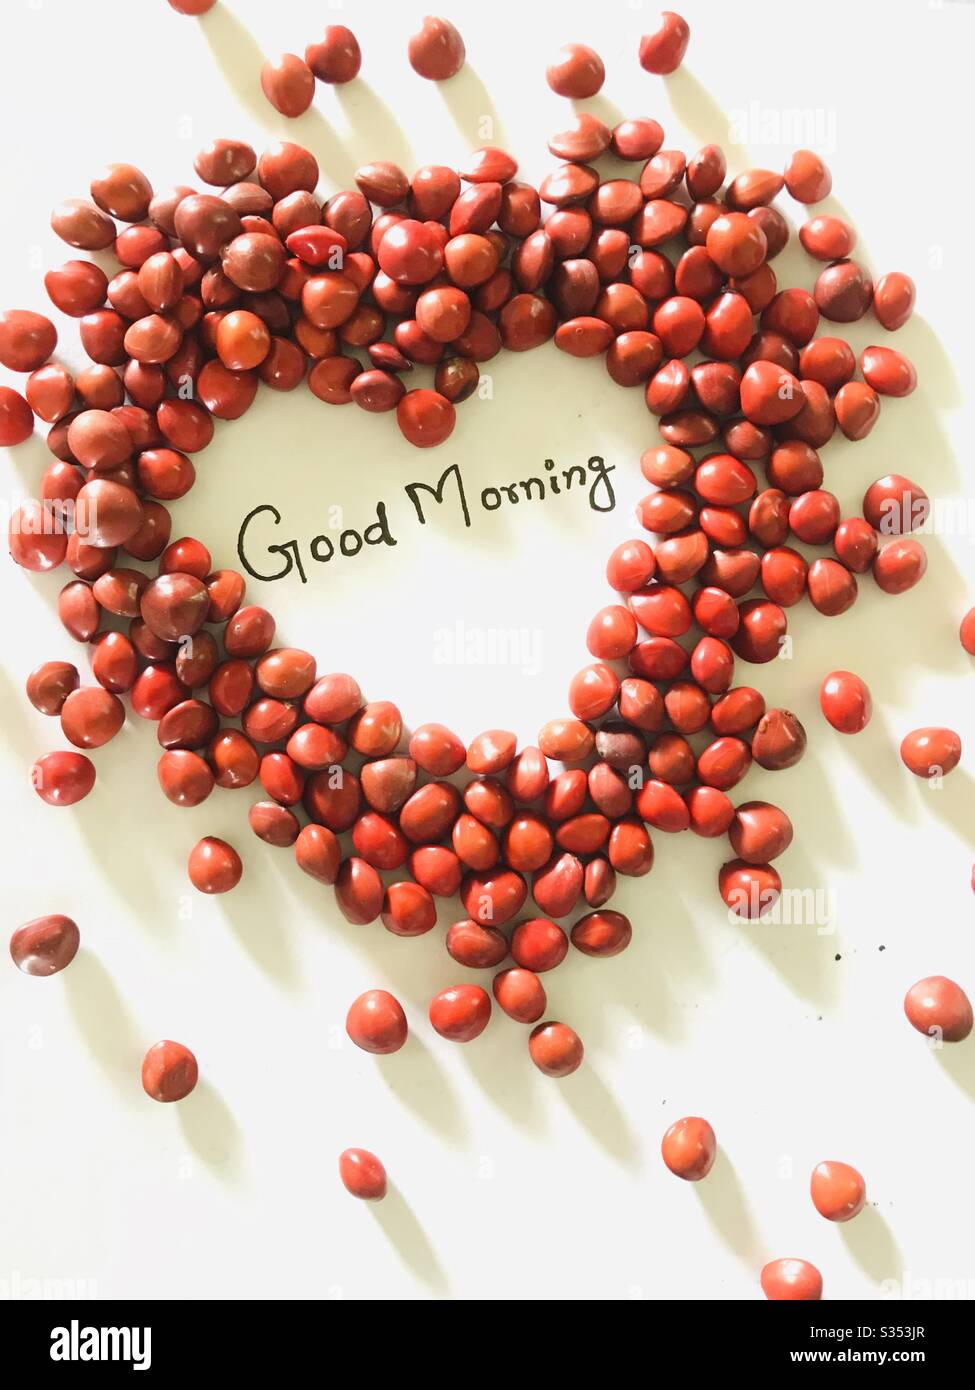 Adenanthera red beads in shape of heart with words Good Morning hand written, with white surface background. Morning message for friends,Manjadikuru in malayalam Stock Photo